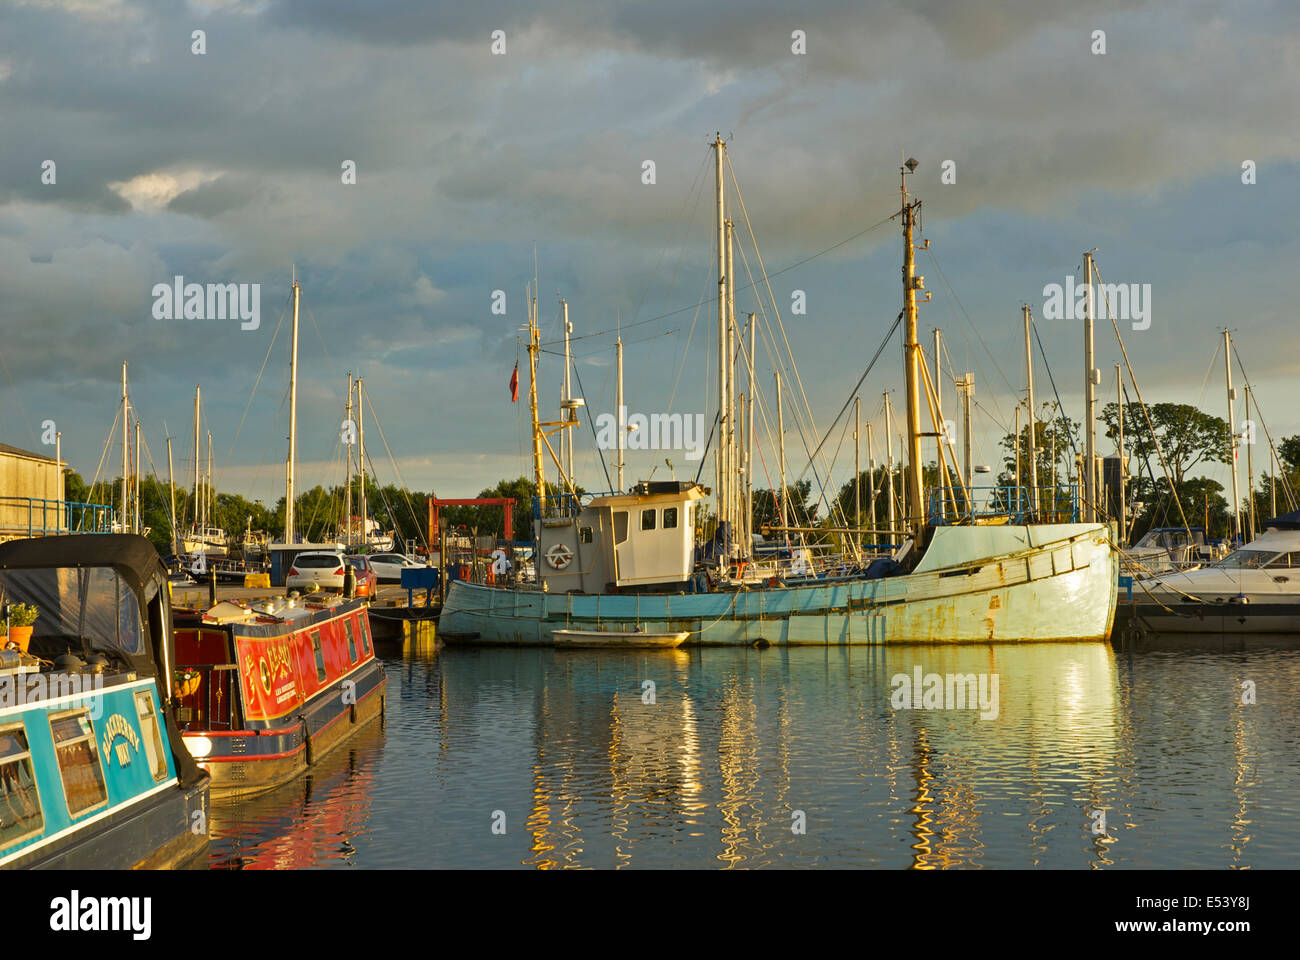 Boats moored in the canal basin, Glasson Dock, Lancashire, England UK Stock Photo